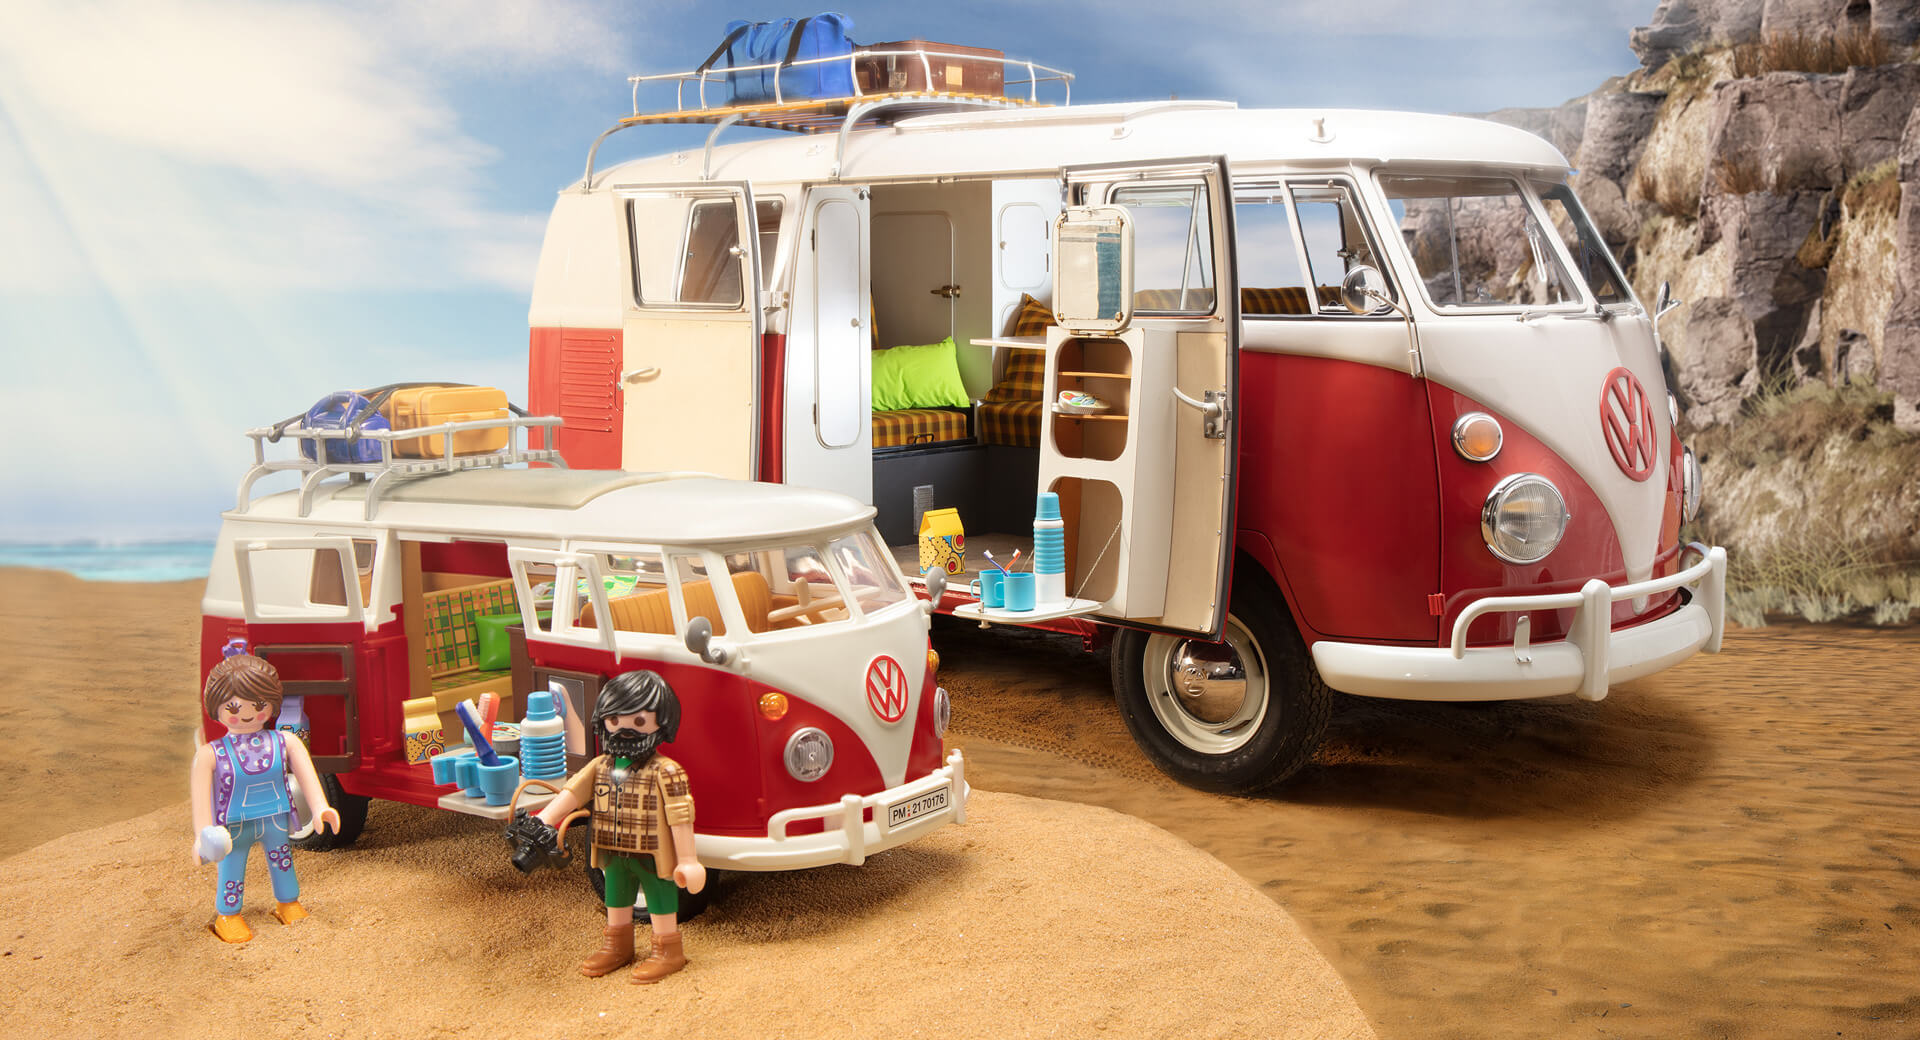 Playmobil VW T1 Camping Bus Is A Pristine Double-Digit Bulli On A